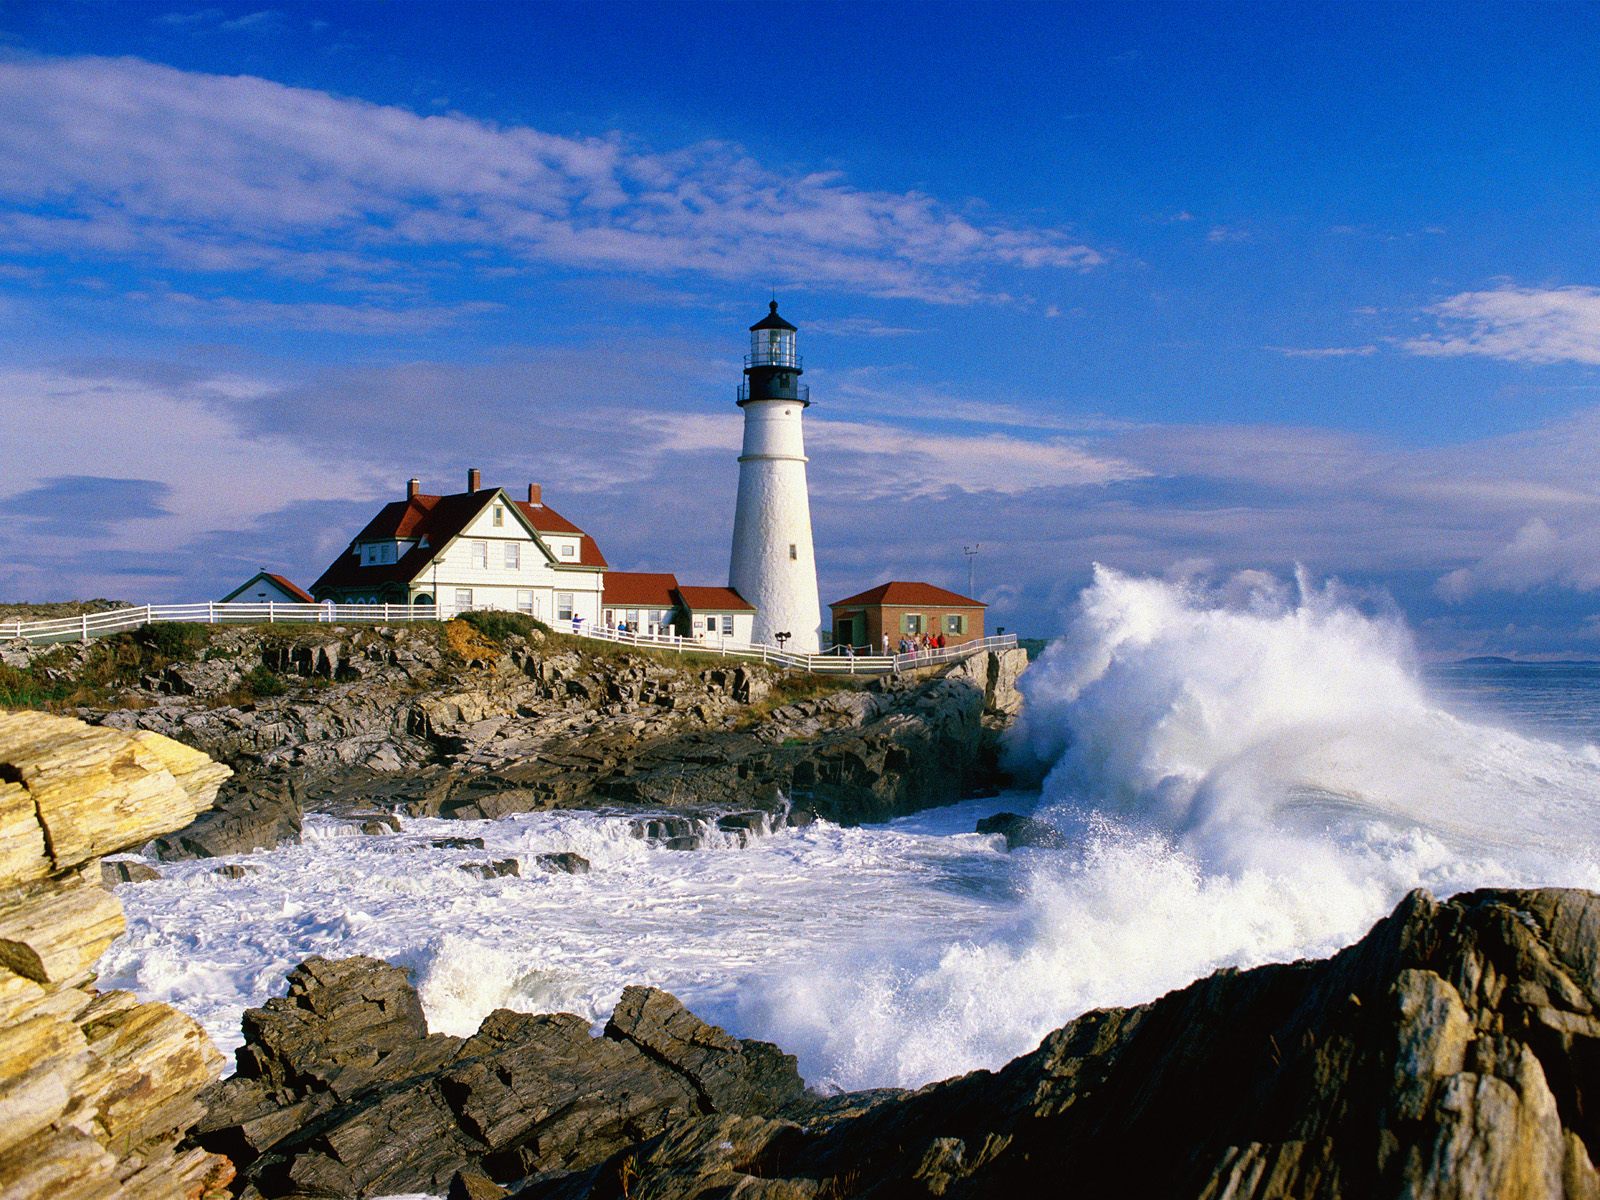  Light Cape Elizabeth Maine   Free high quality background pictures